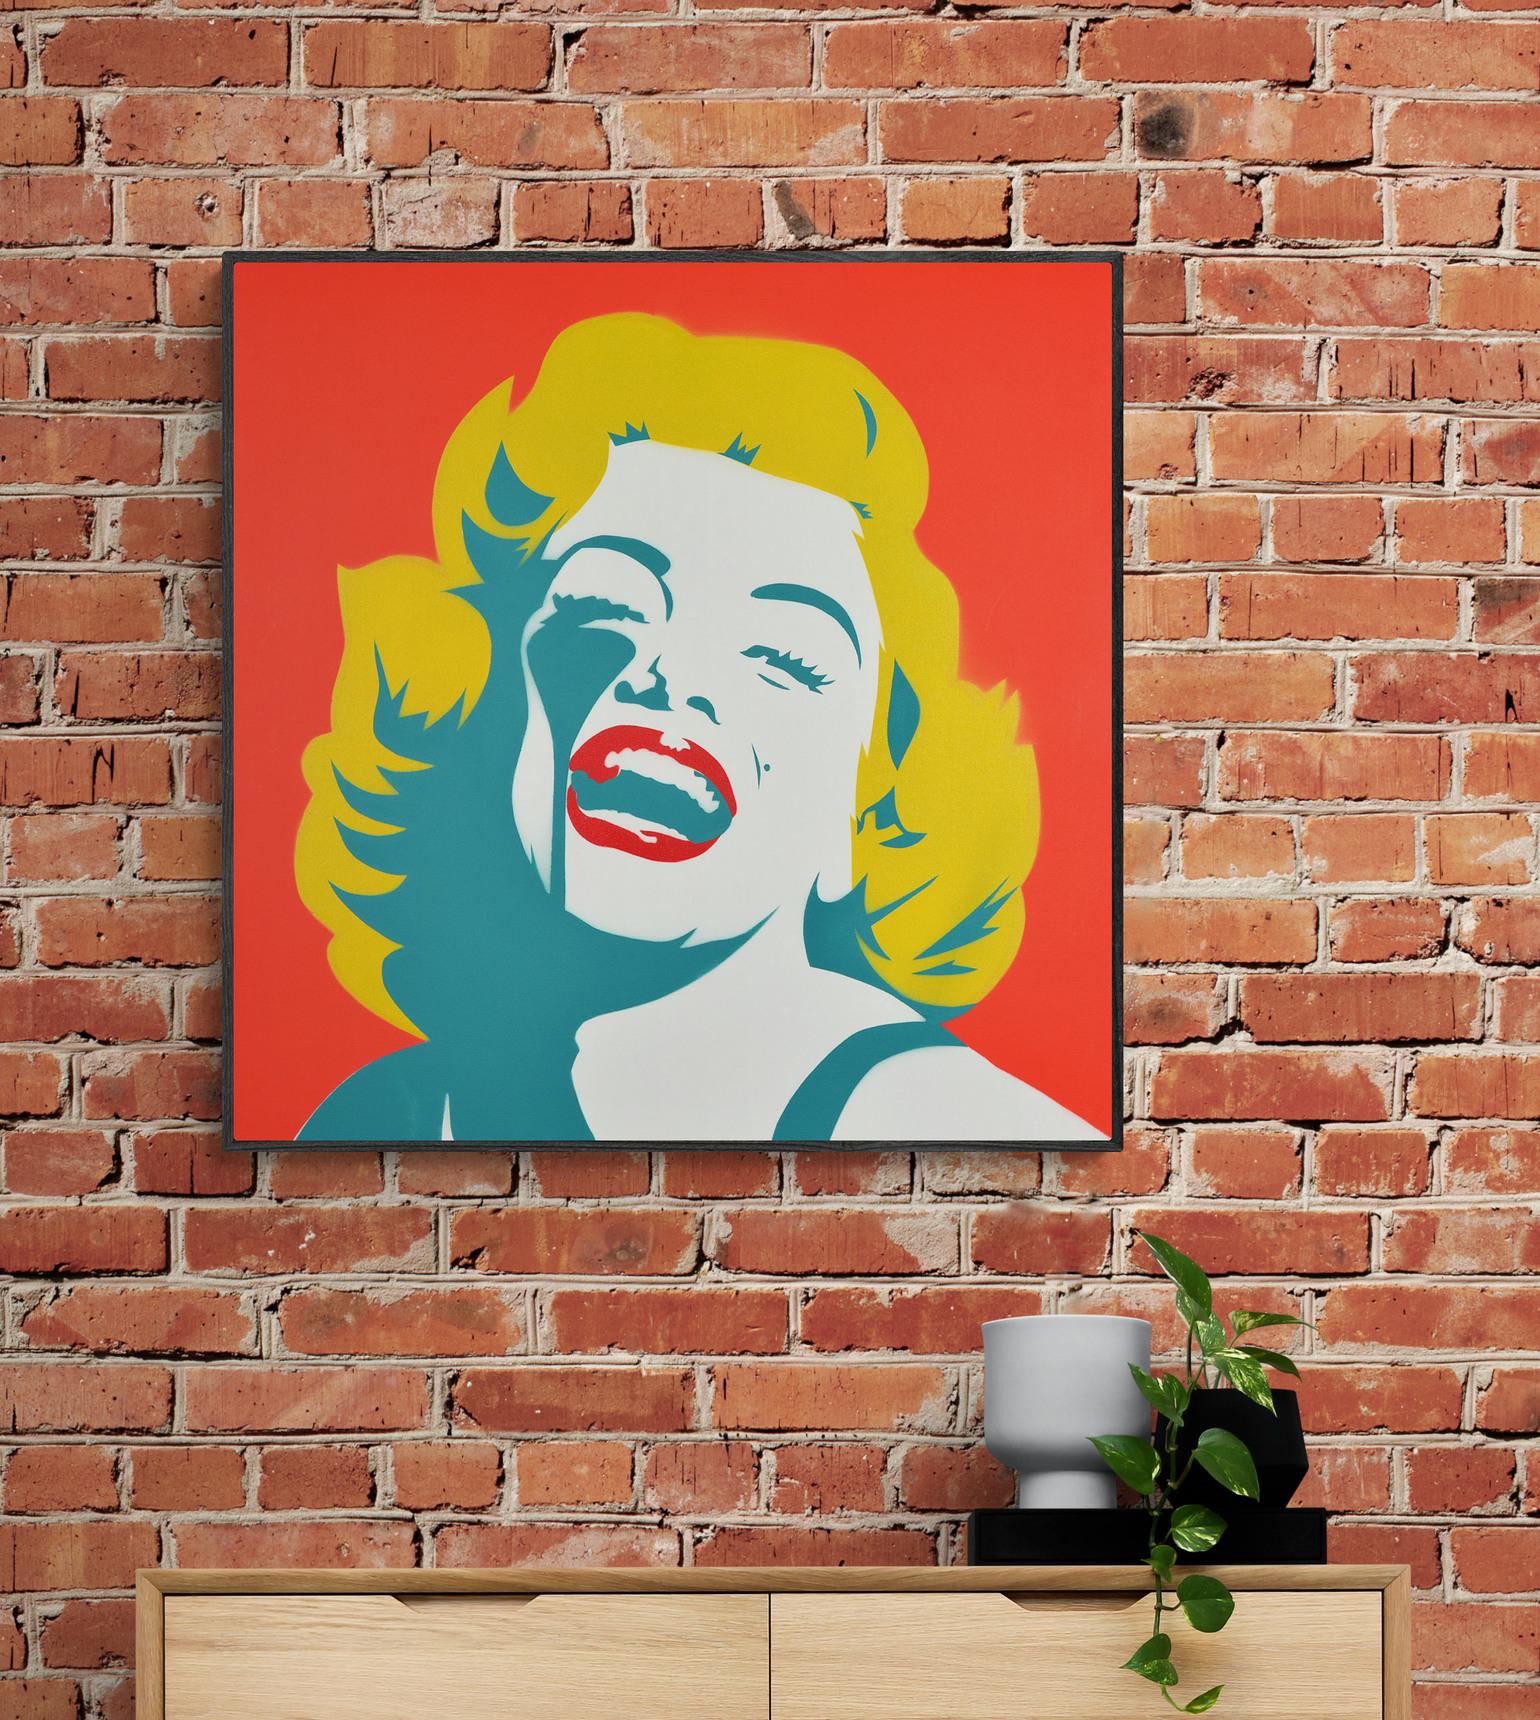 Screaming Marilyn - Green Goddess (Canvas)
Date of creation: 2018
Medium: Spray paint & stencil on canvas
Edition: Unique work, numbered 1/1
Size: 76 x 76 cm
Observations:
This 